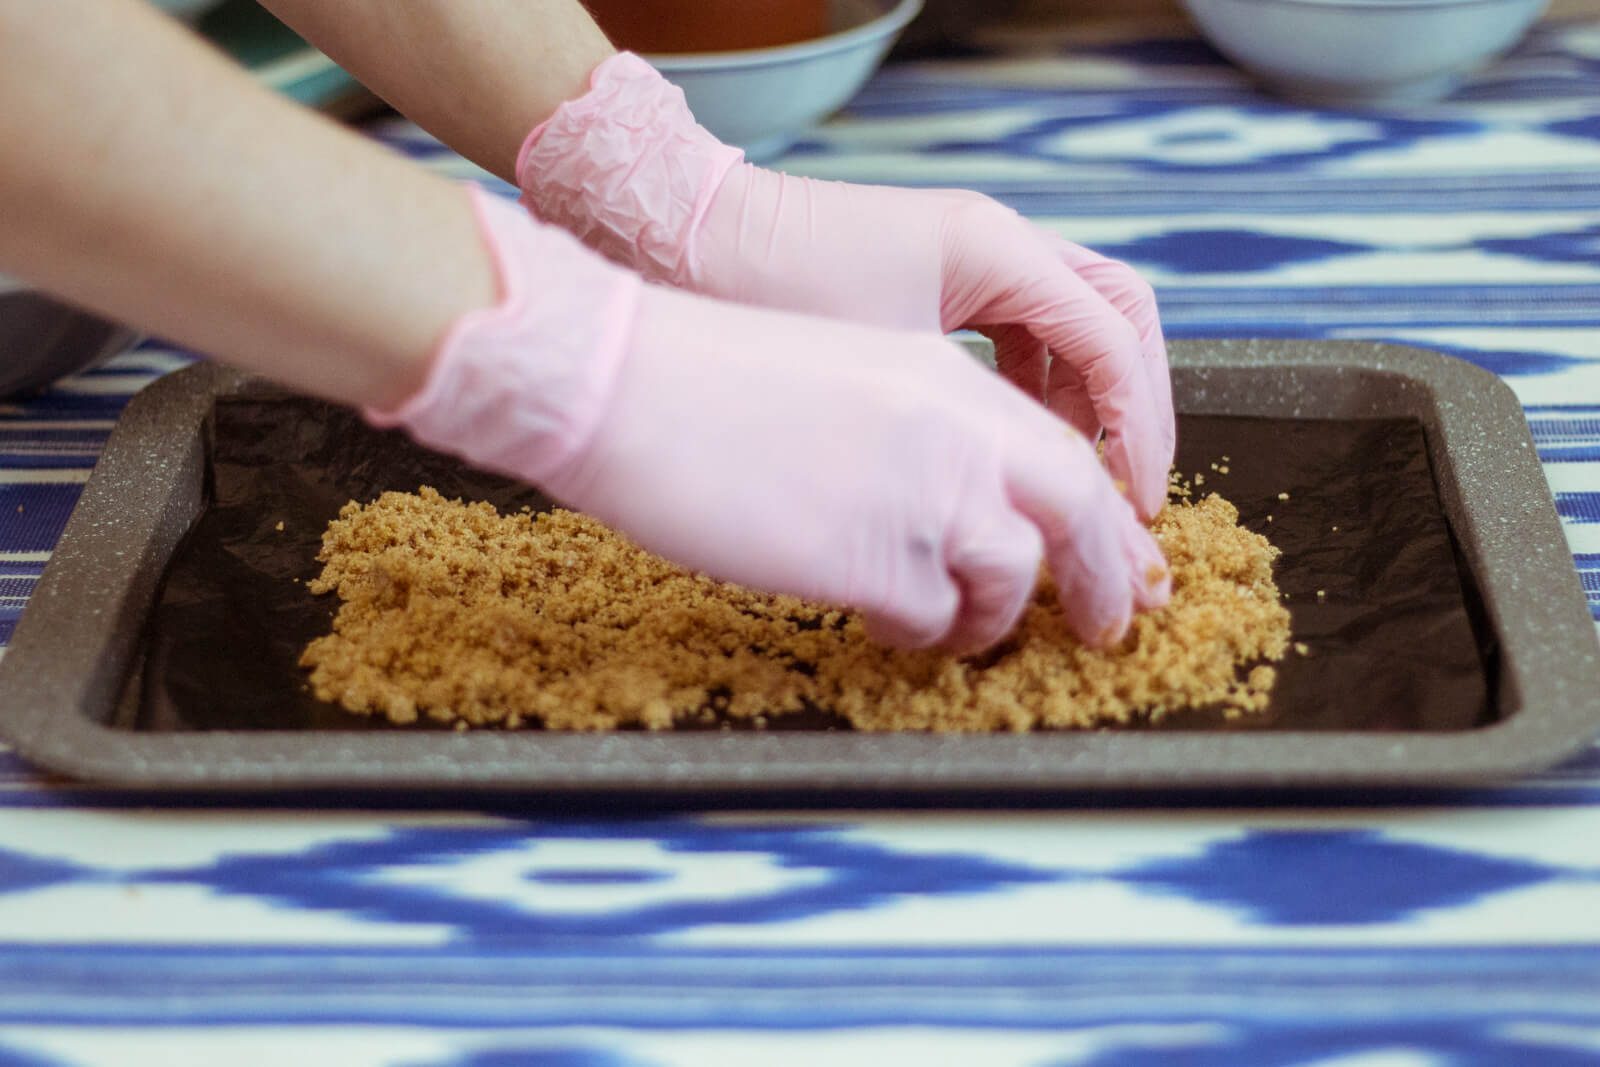 Spread the dough of about 3 mm thick over a silicon mat or baking paper.